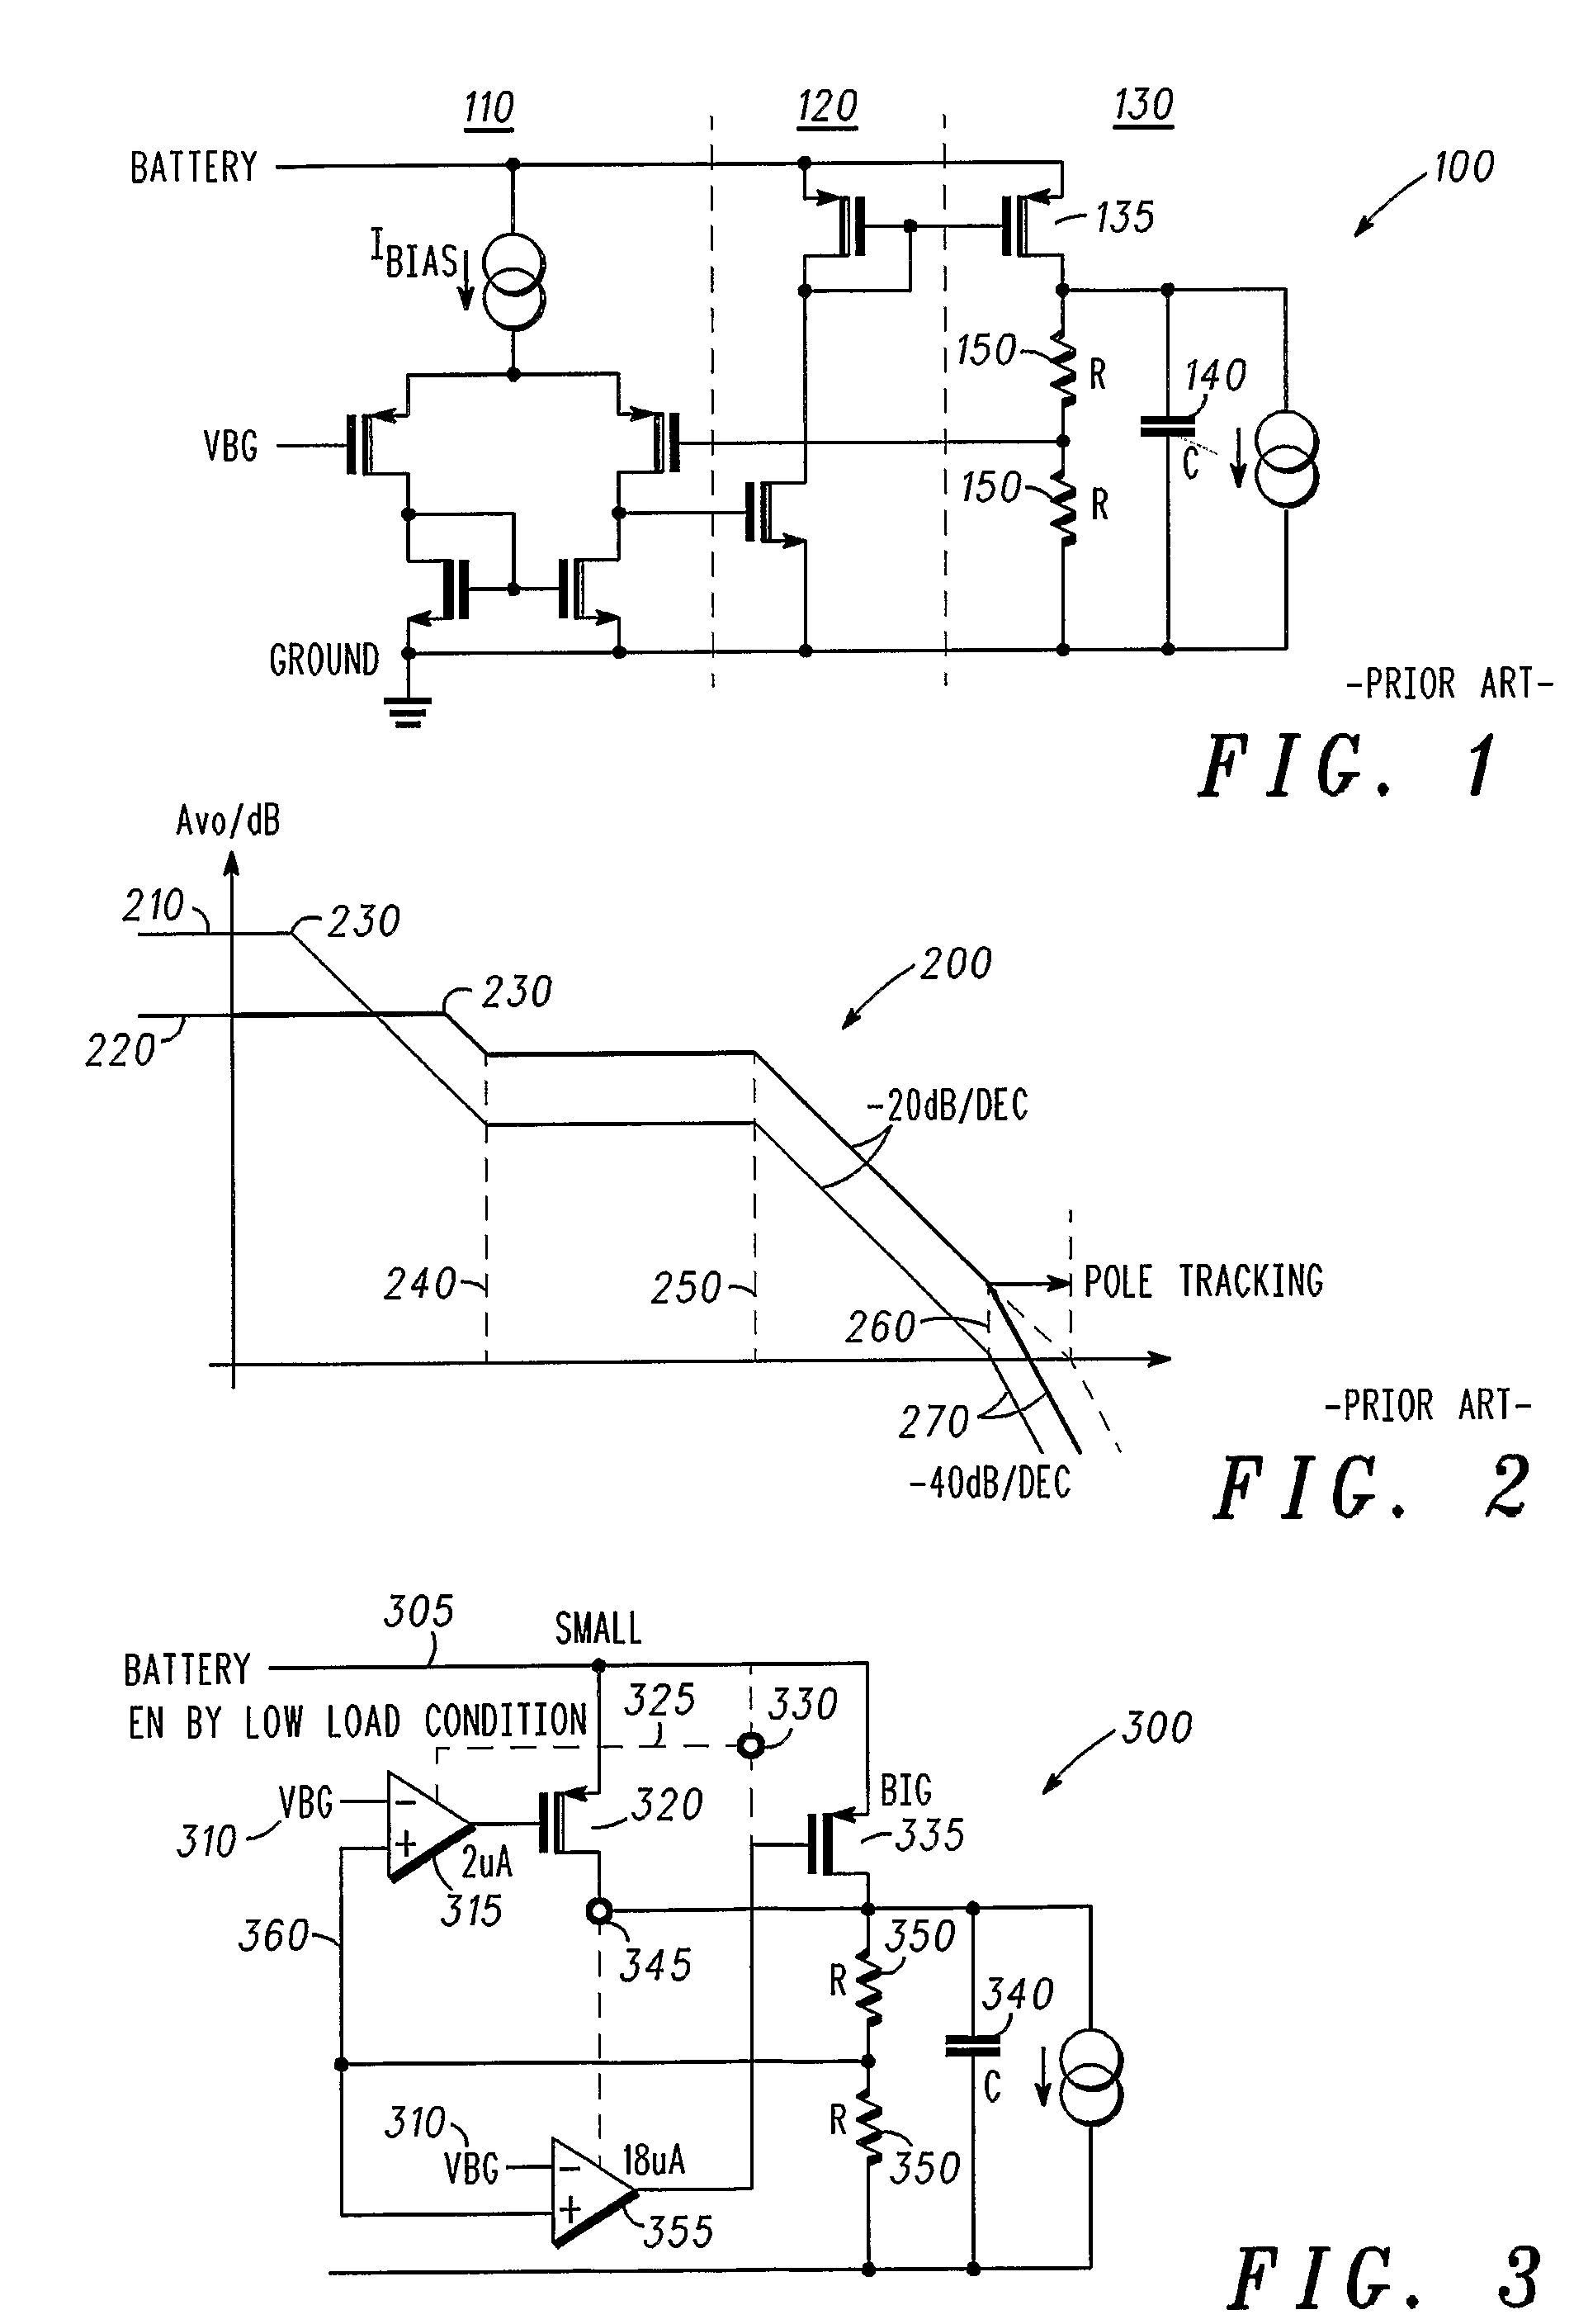 Voltage Regulator With Pass Transistors Carrying Different Ratios Of The Total Load Current And Method Of Operation Therefor